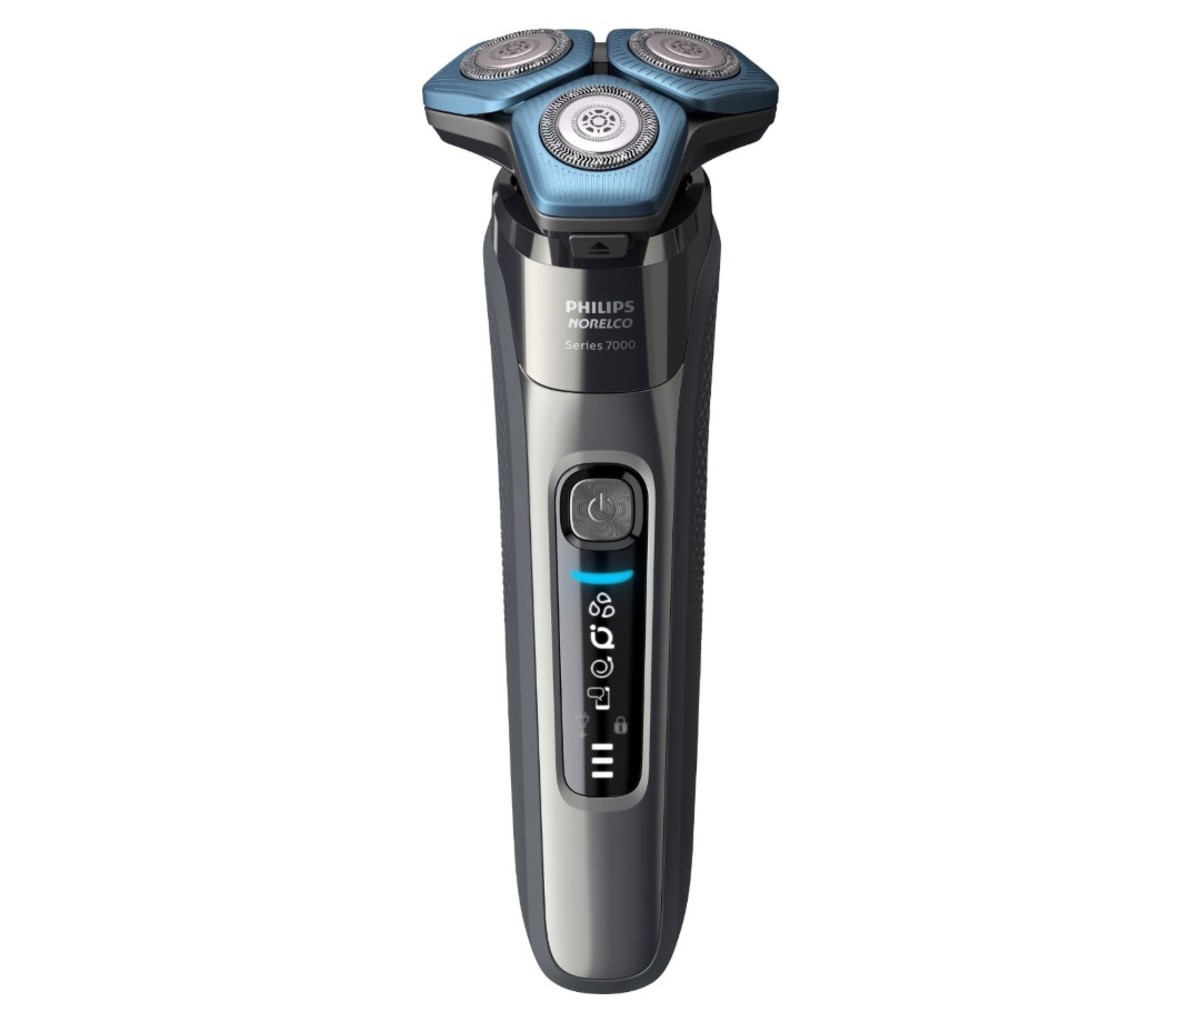 Philips Norelco Electric Rotary Shaver.